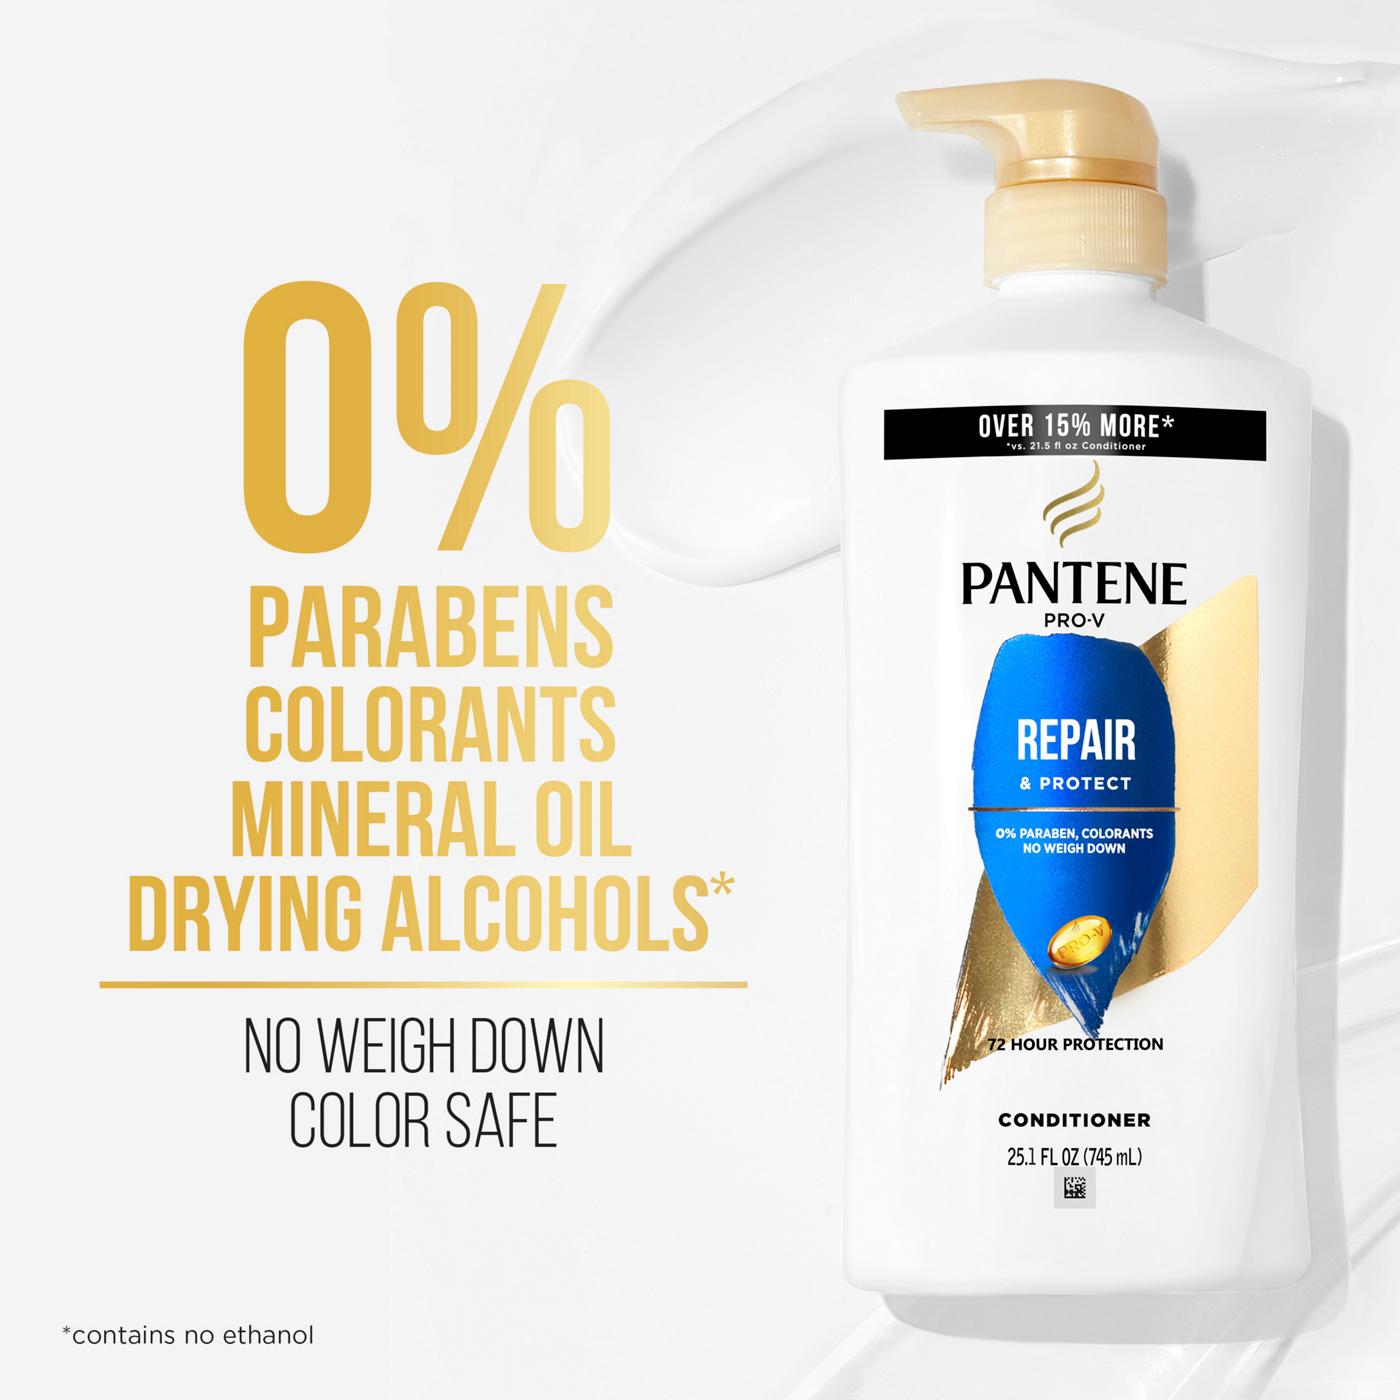 Pantene PRO-V Repair & Protect Conditioner; image 2 of 9